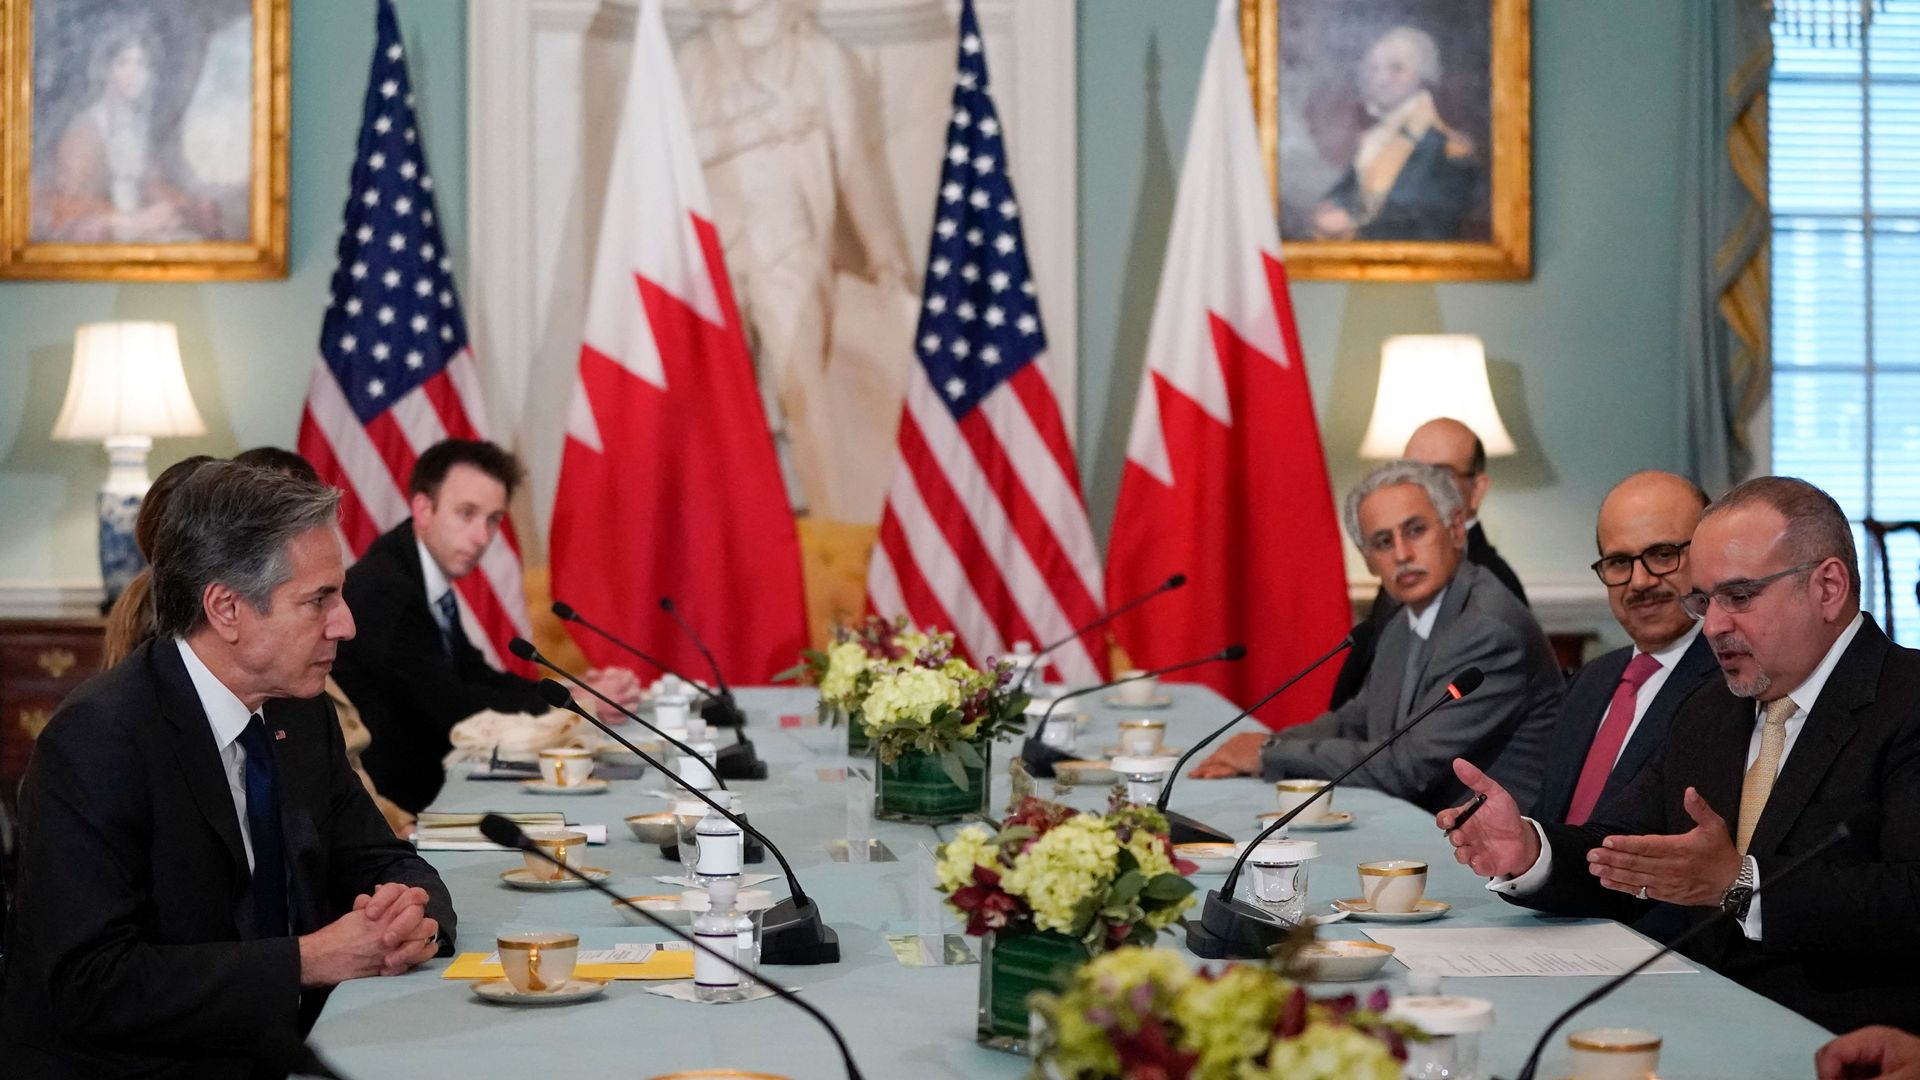 US Secretary of State Antony Blinken (L) meets with Bahrain's Crown Prince and Prime Minister, Salman bin Hamad Al Khalifa, at the State Department in Washington, DC,